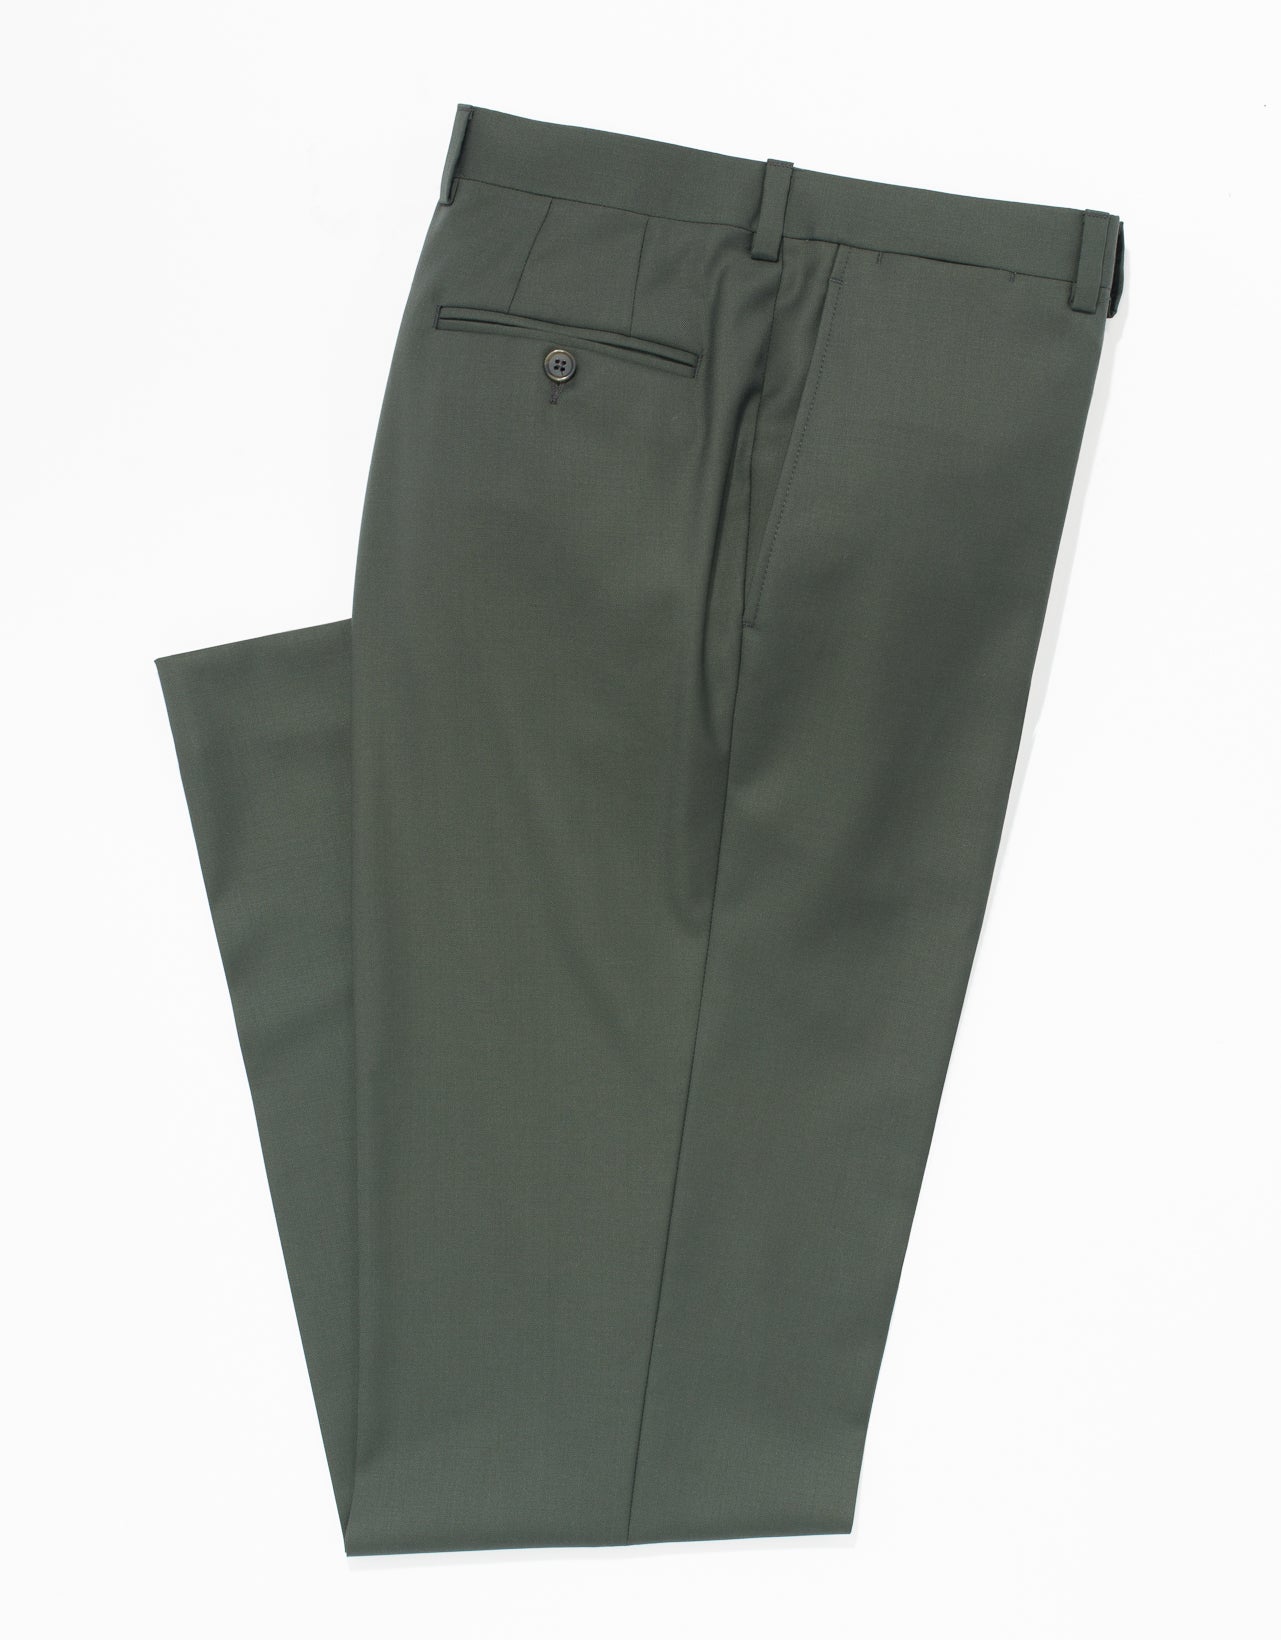 OLIVE WOOL TWILL TROUSERS - CLASSIC FIT